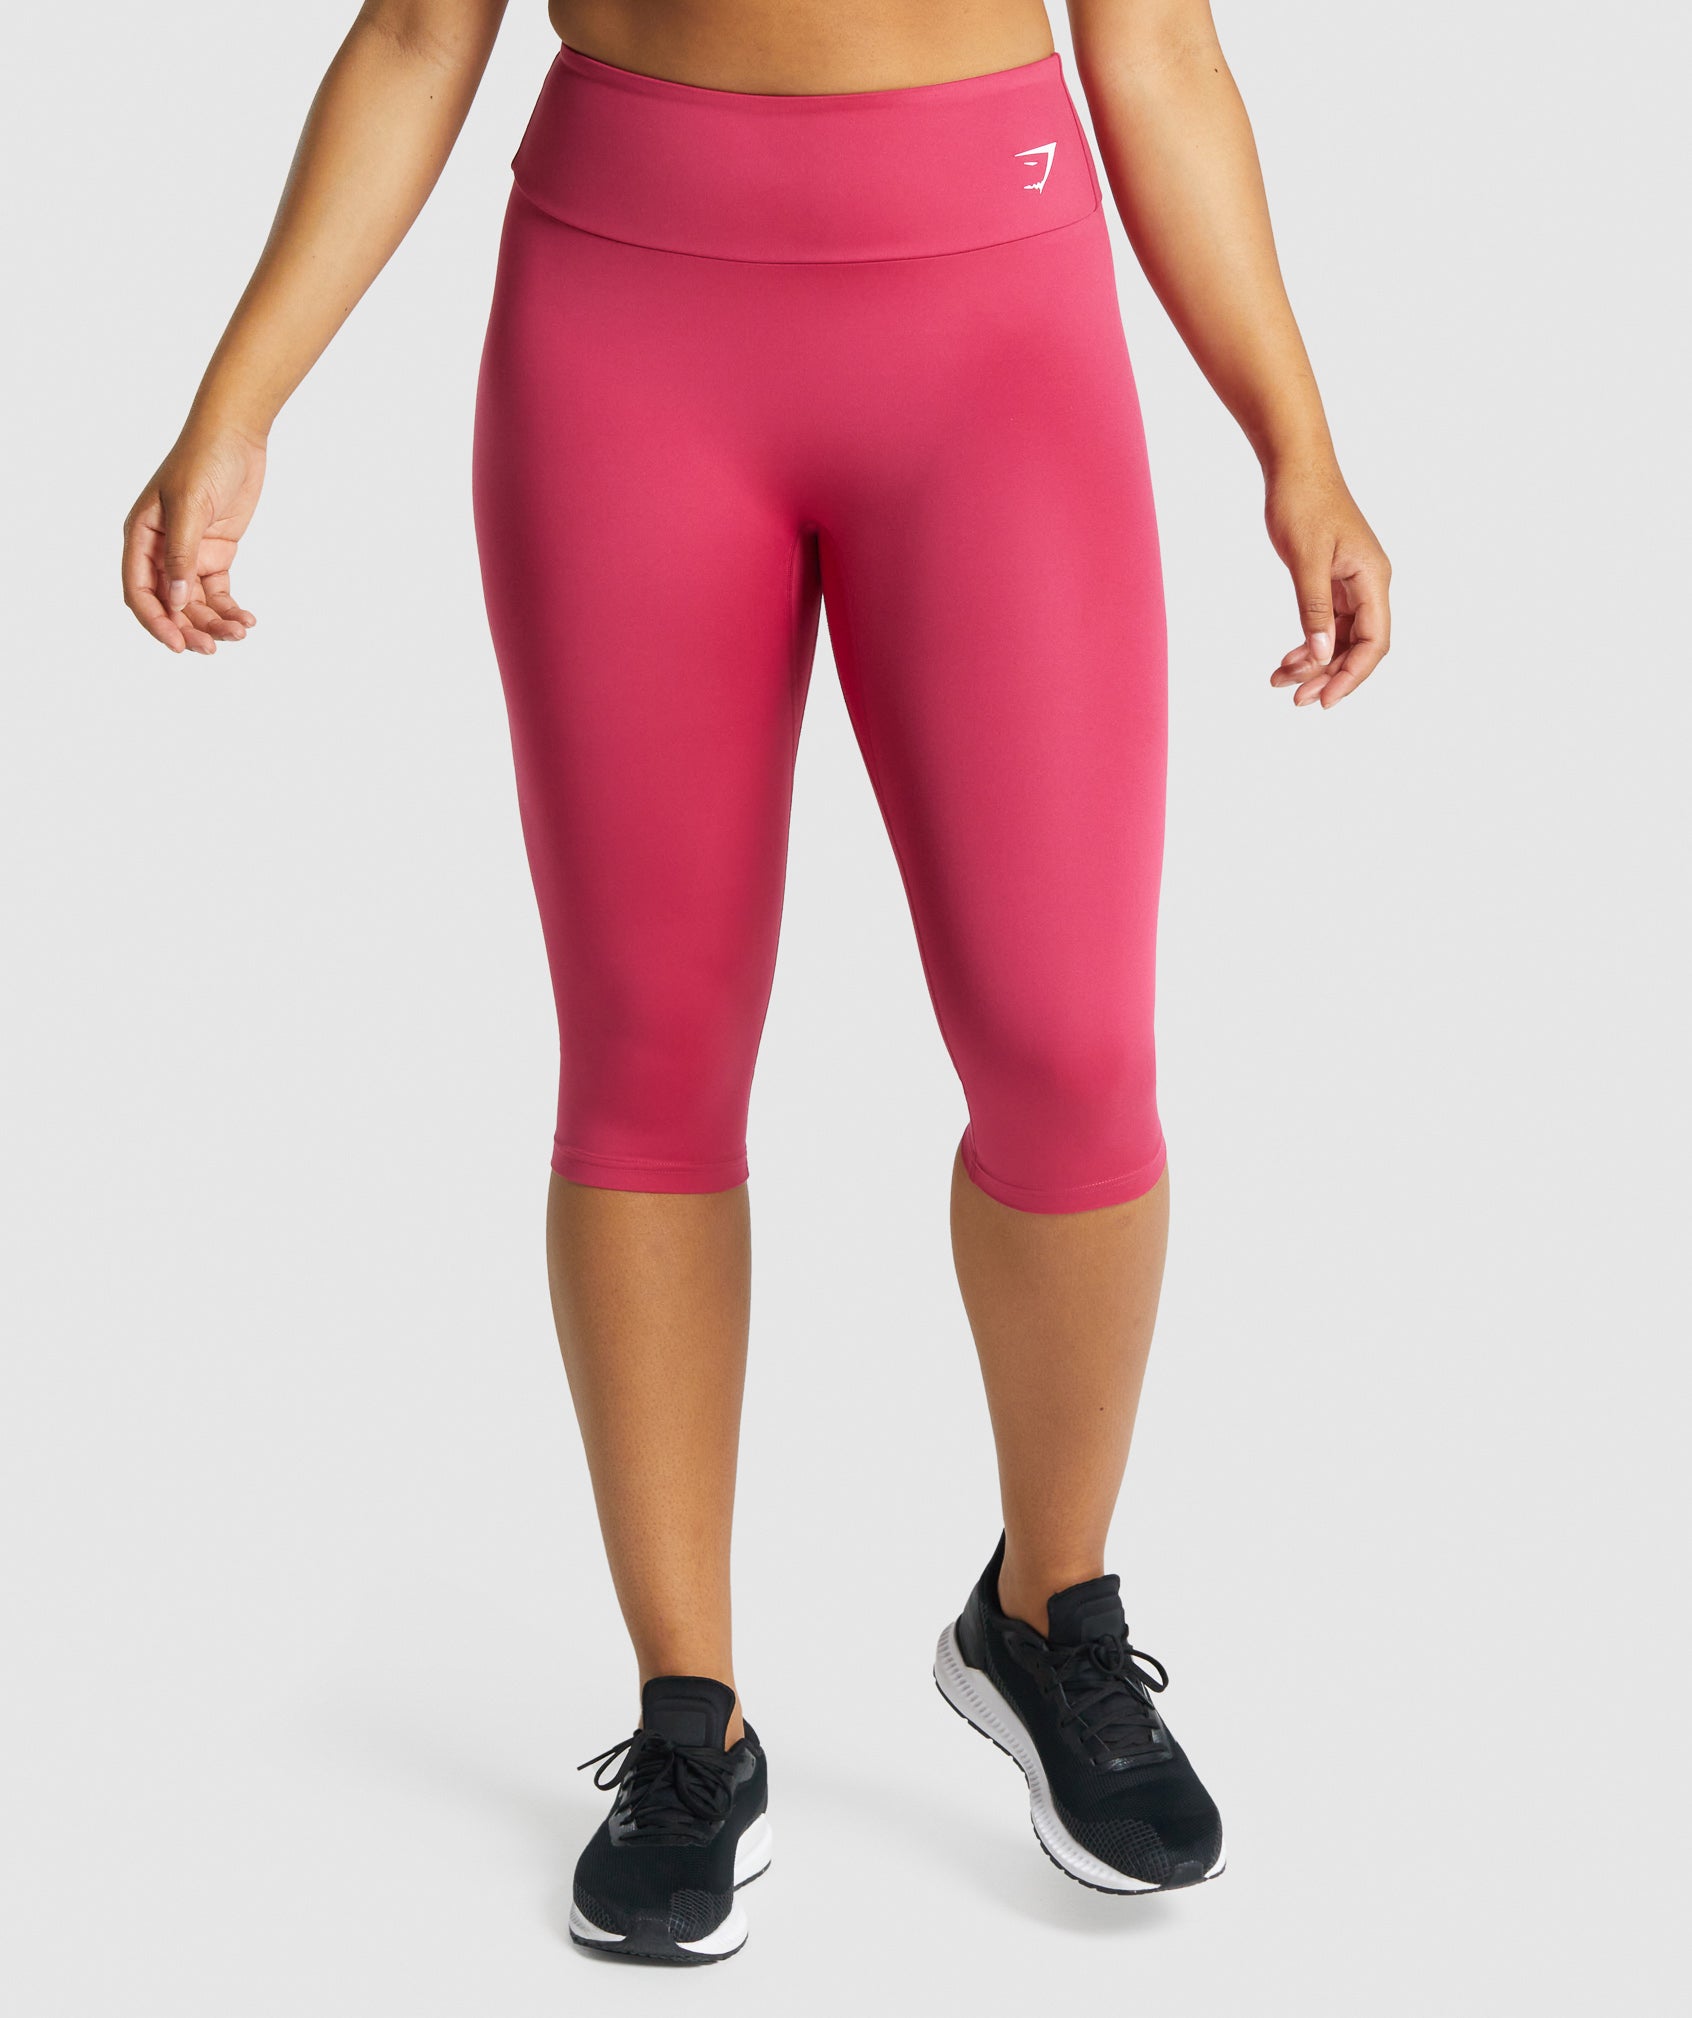 Gymshark Leggings Womens Small Pink Coral Flex Activewear Workout Gym - $29  - From Kristen